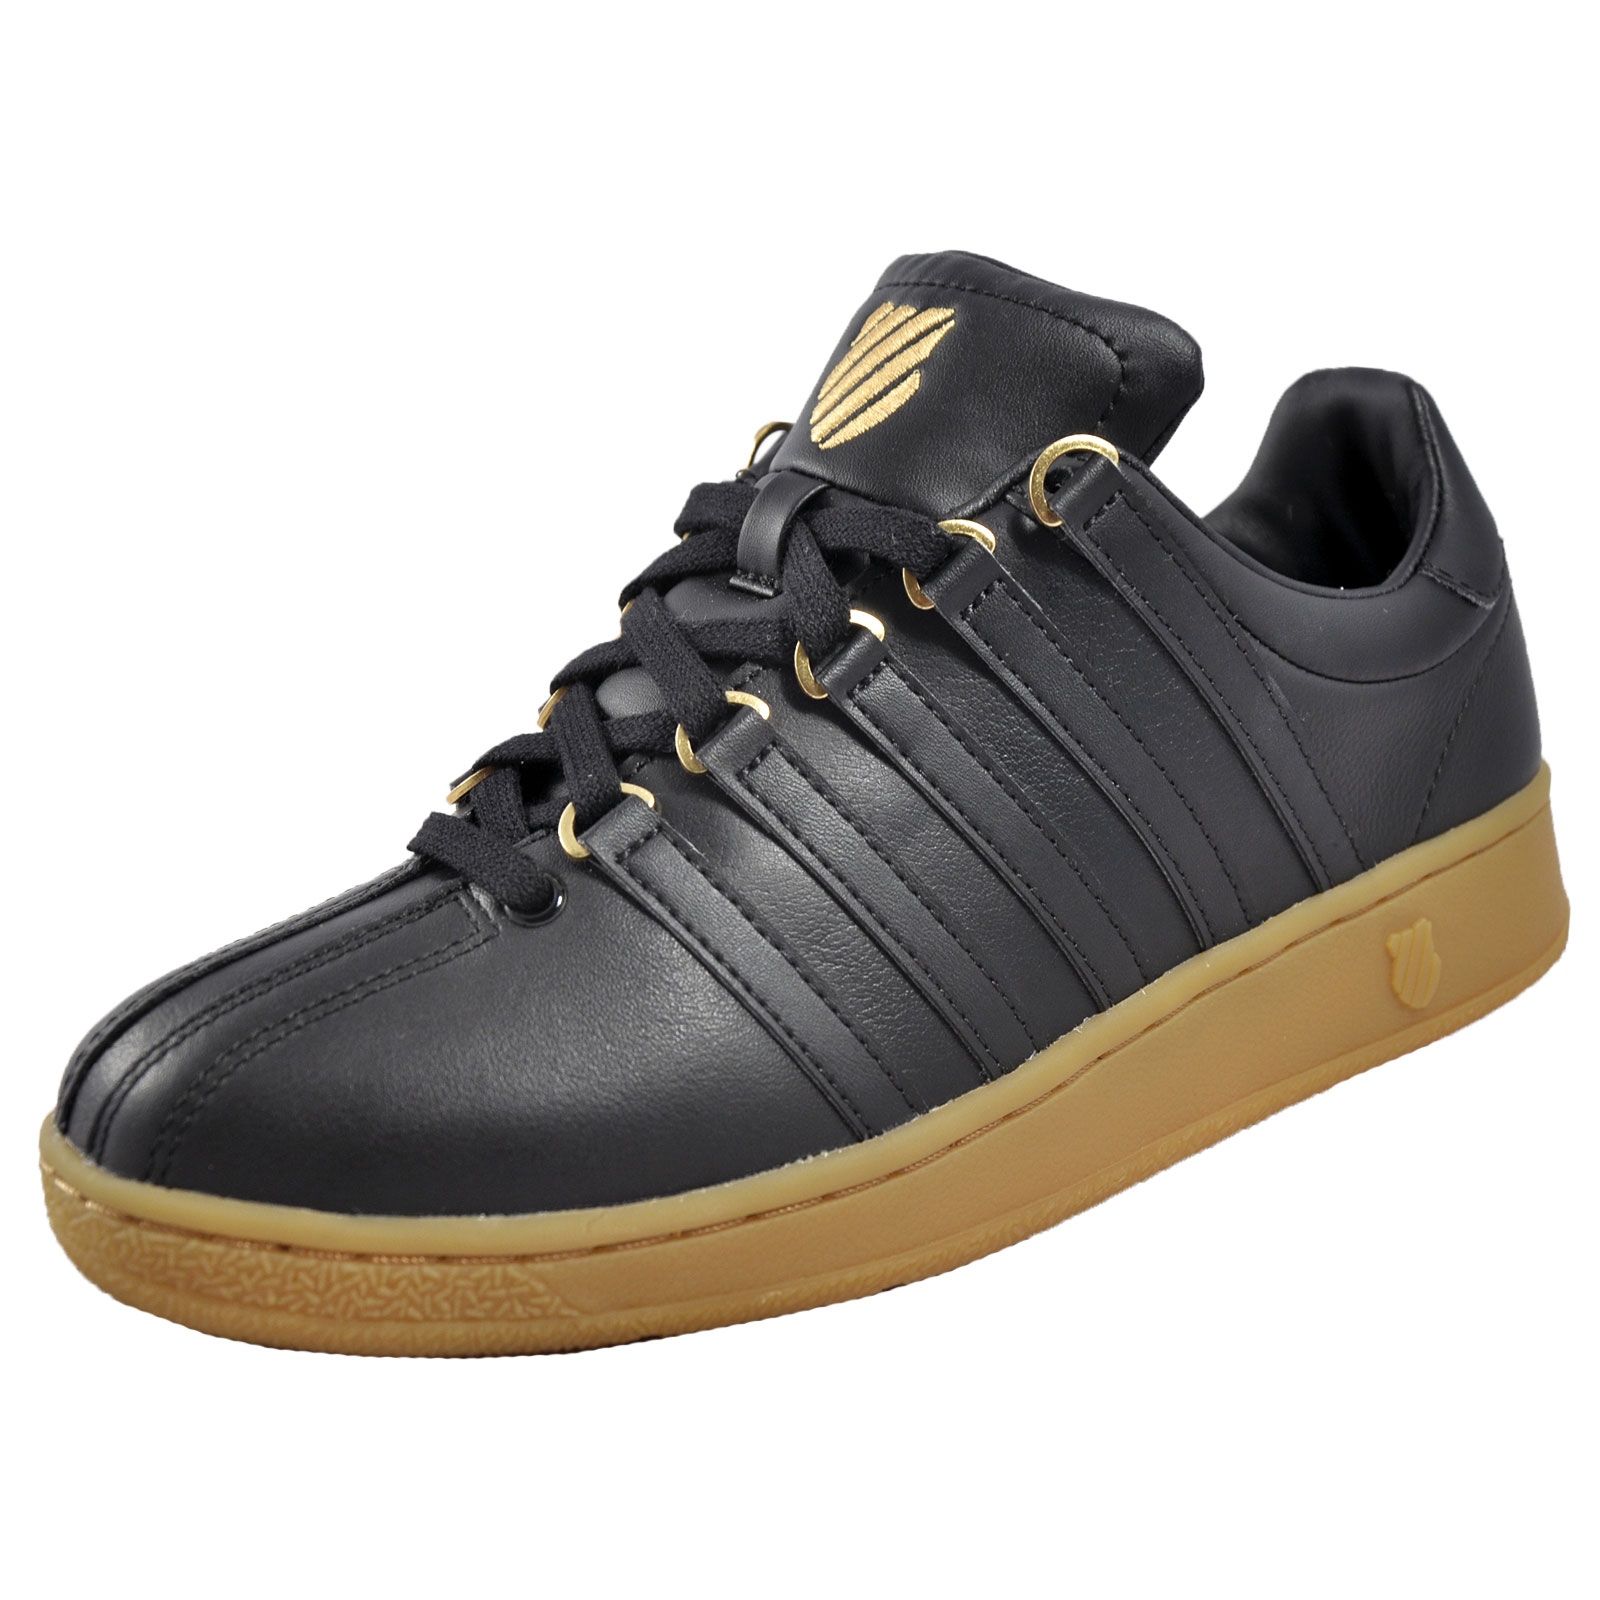 K Swiss Classic VN Vintage Mens Casual Retro Leather Trainers Black | eBay